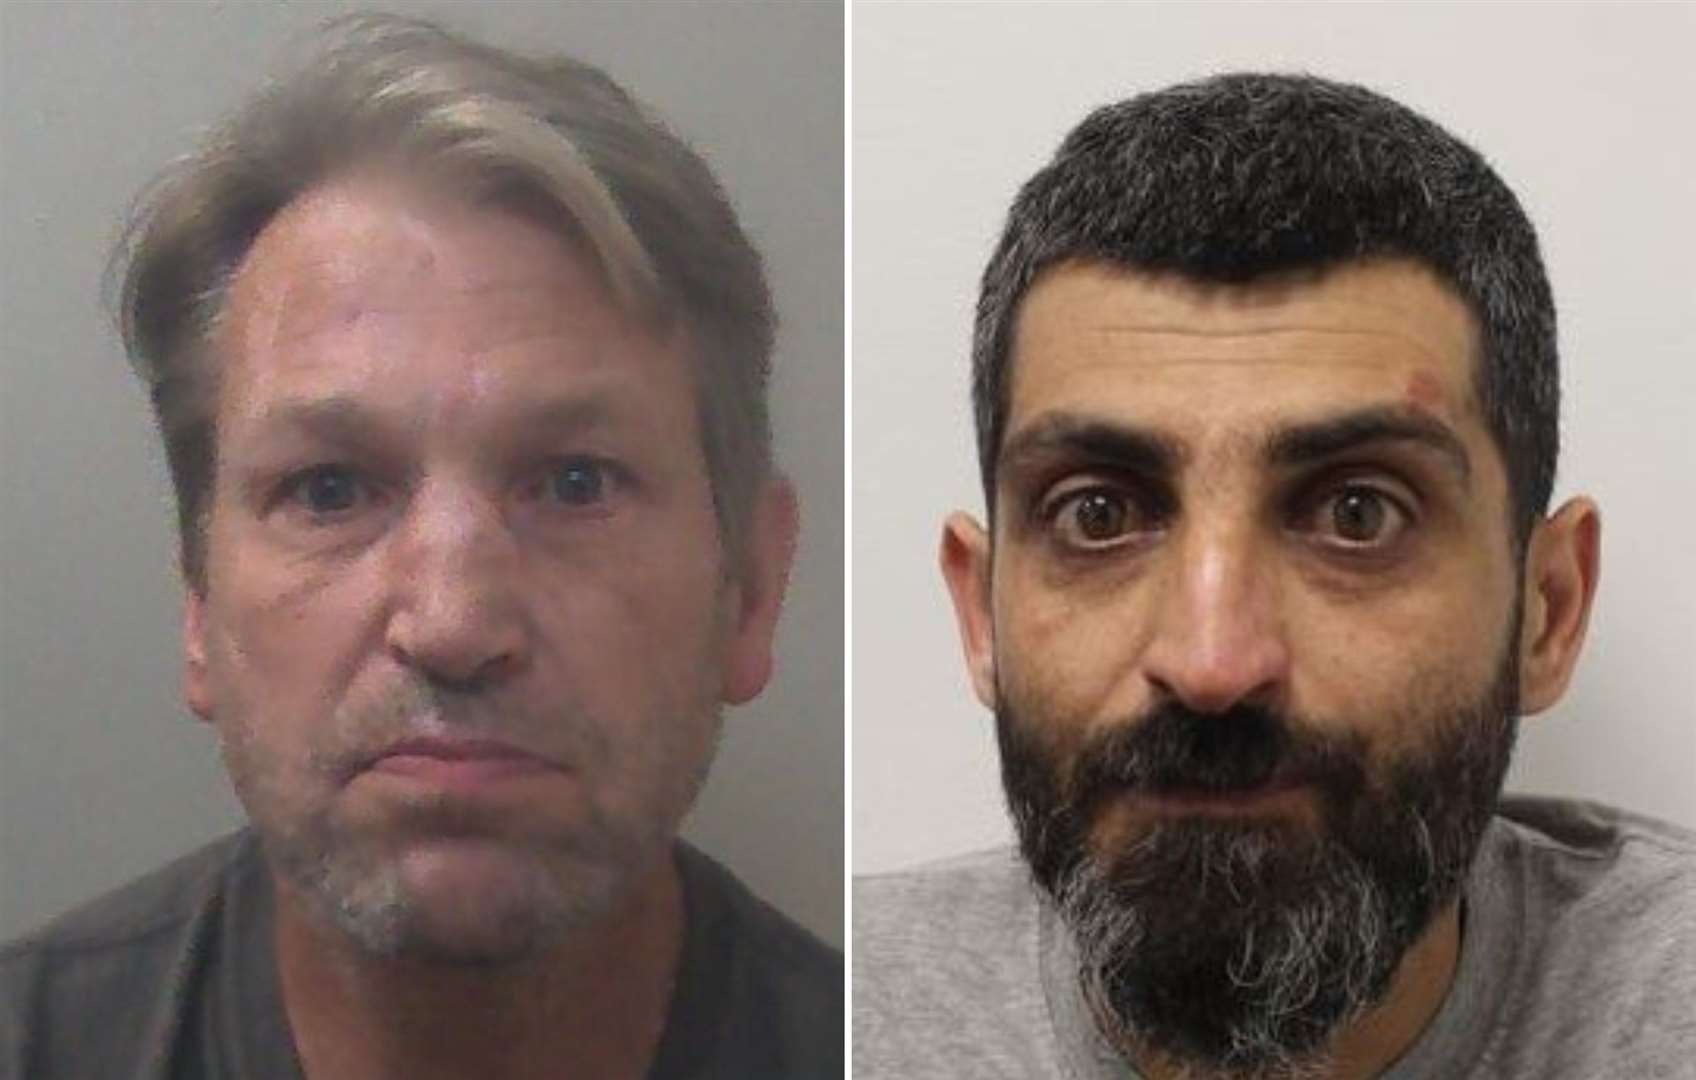 Robert Reading, 50, from Rochester (left) and Mojtab Moradi, 37, from Plumstead (right) were jailed for possession of a firearm. Picture: National Crime Agency